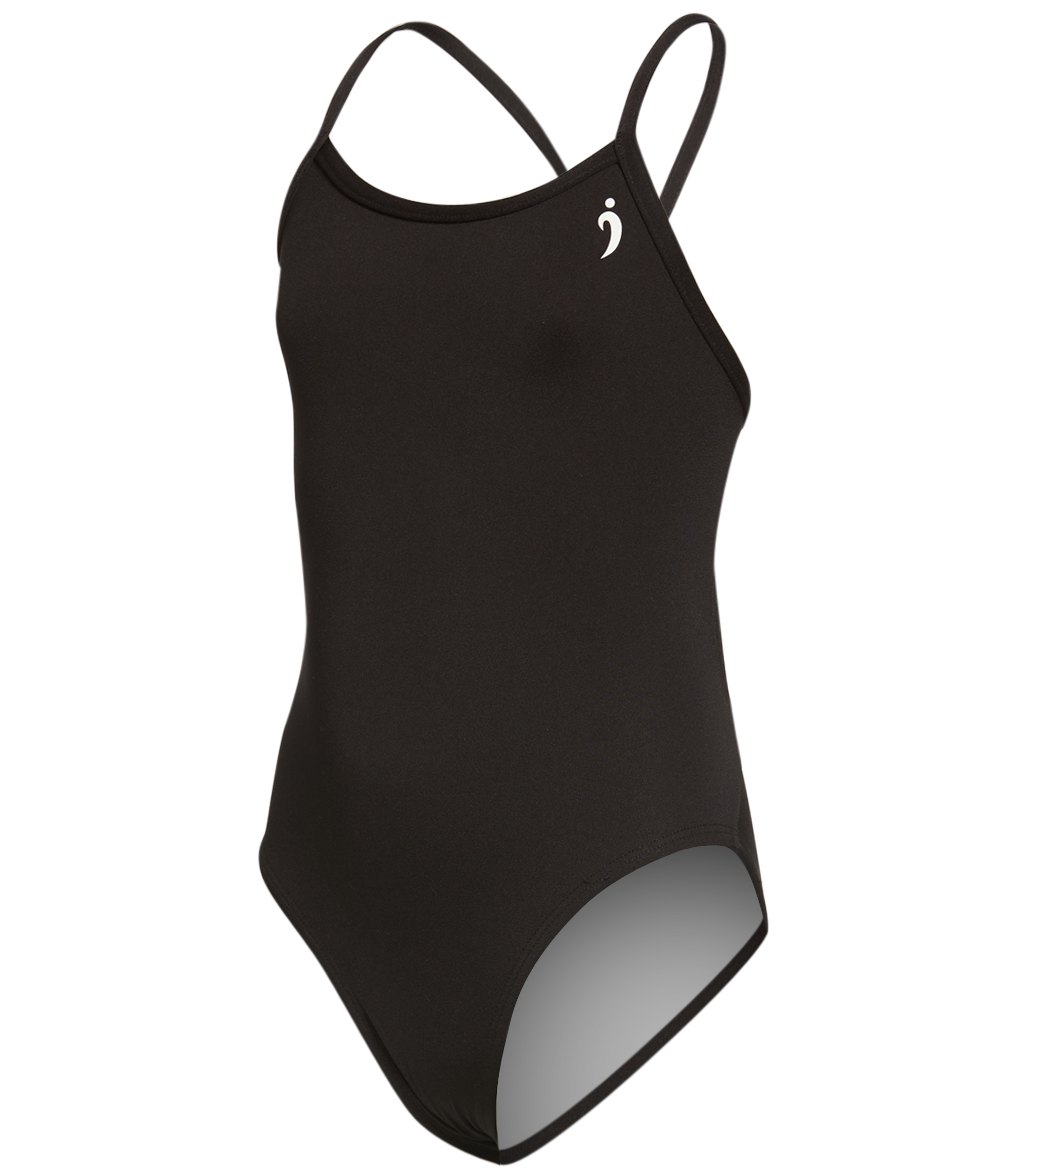 Illusions Activewear Girls' Max Black Thin Strap One Piece Swimsuit - 22 Polyester - Swimoutlet.com